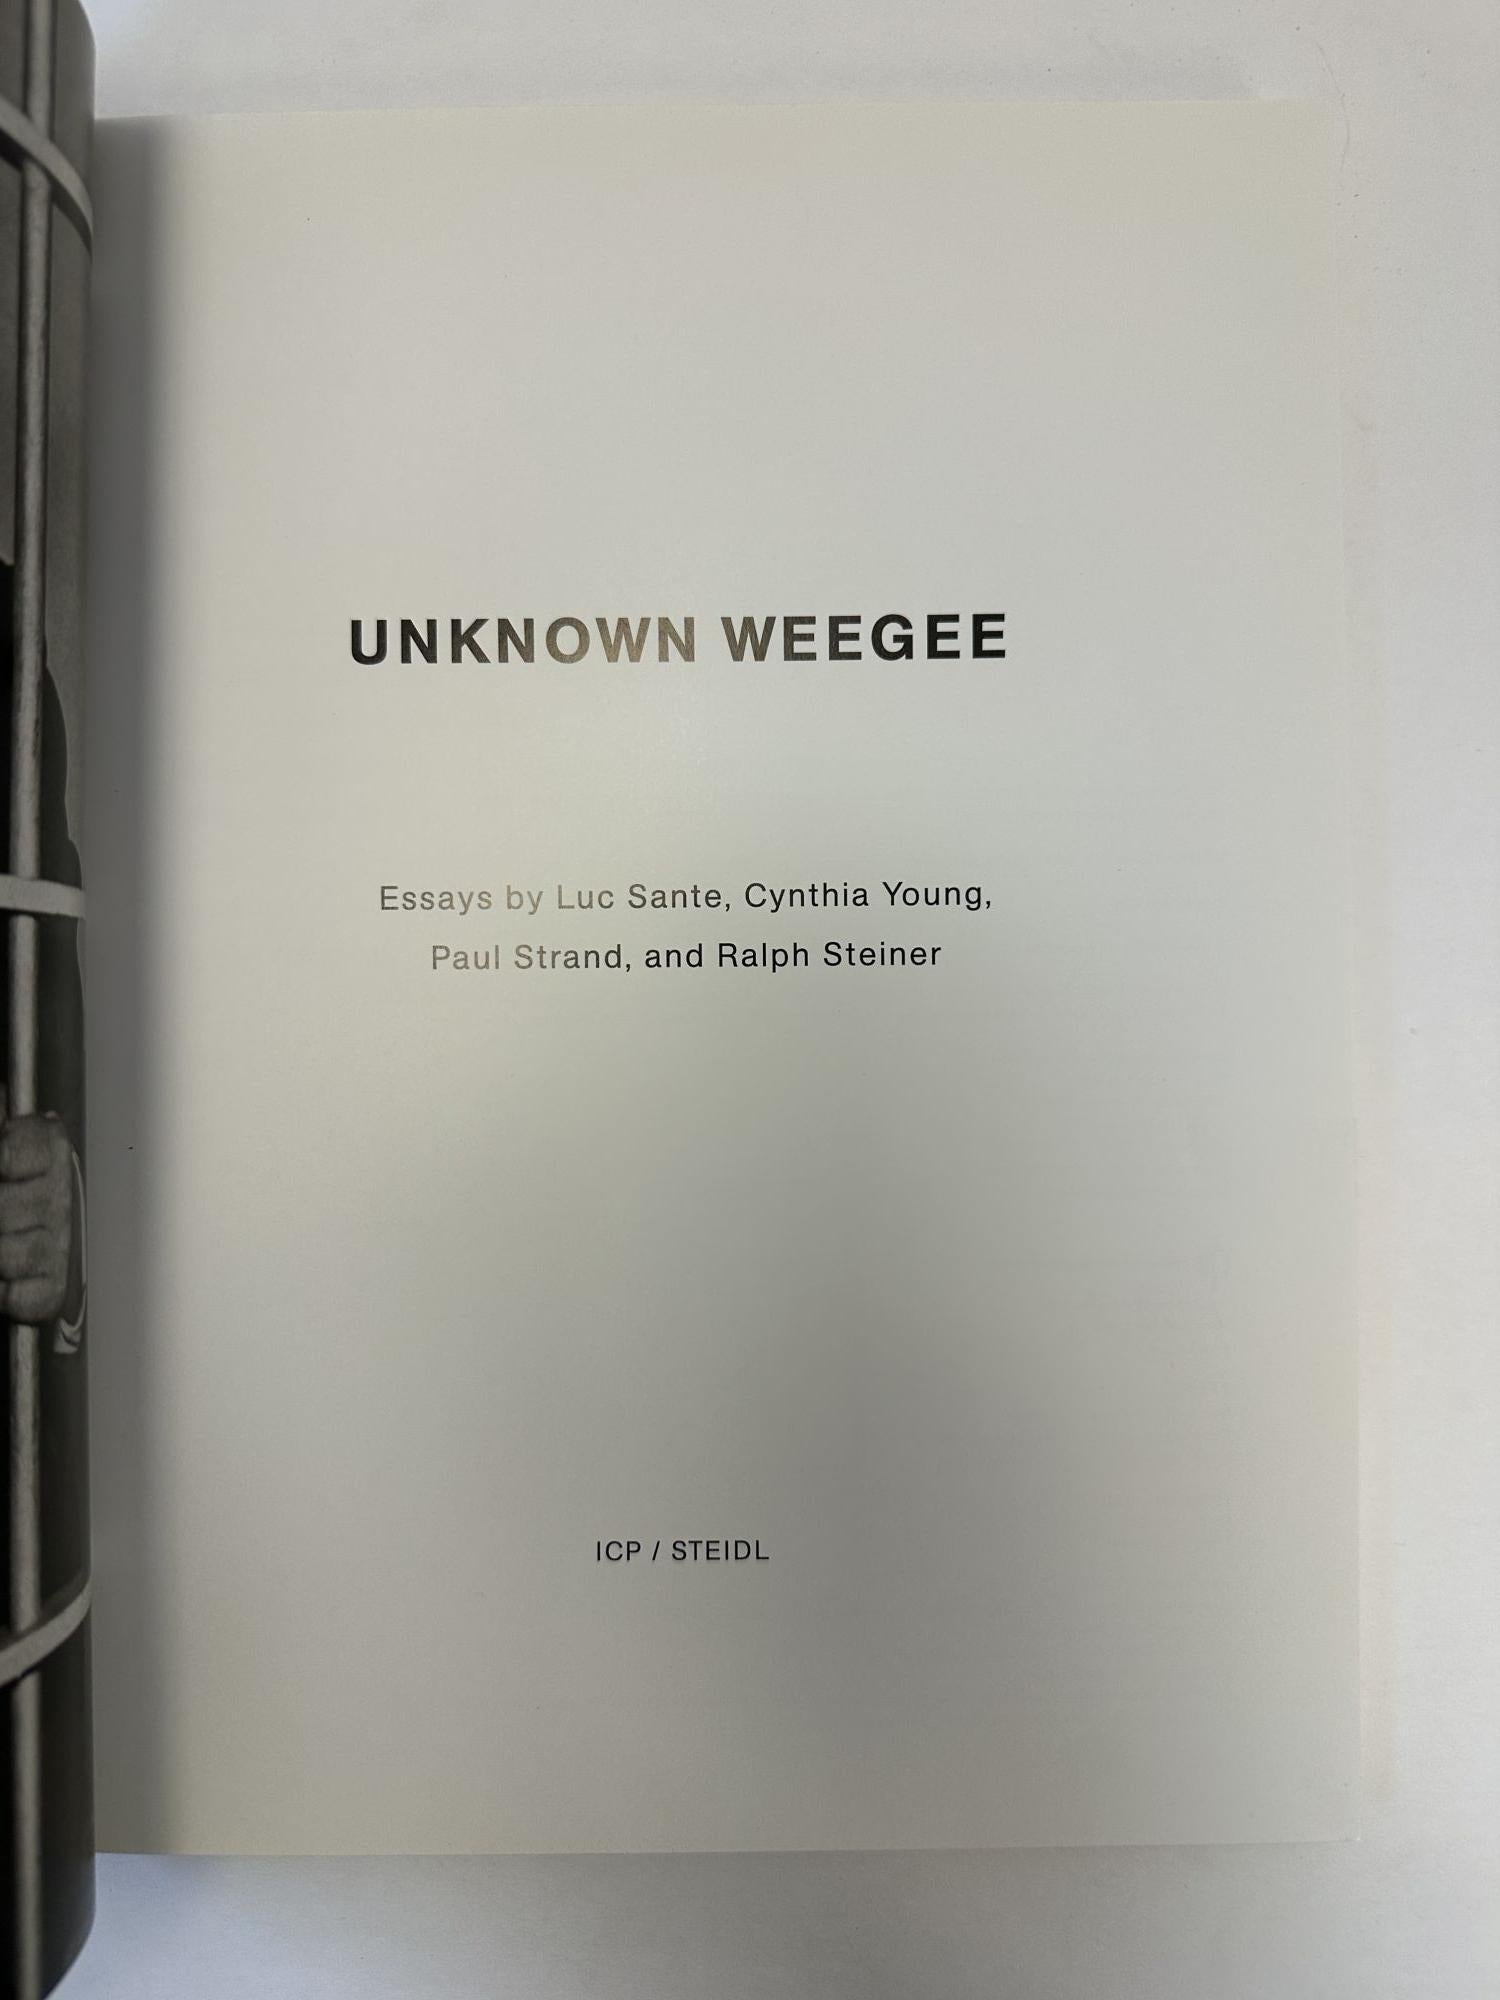 UNKNOWN WEEGEE INSCRIBED by Luc Sante, Cynthia Young, Paul Strand, Ralph  Steiner